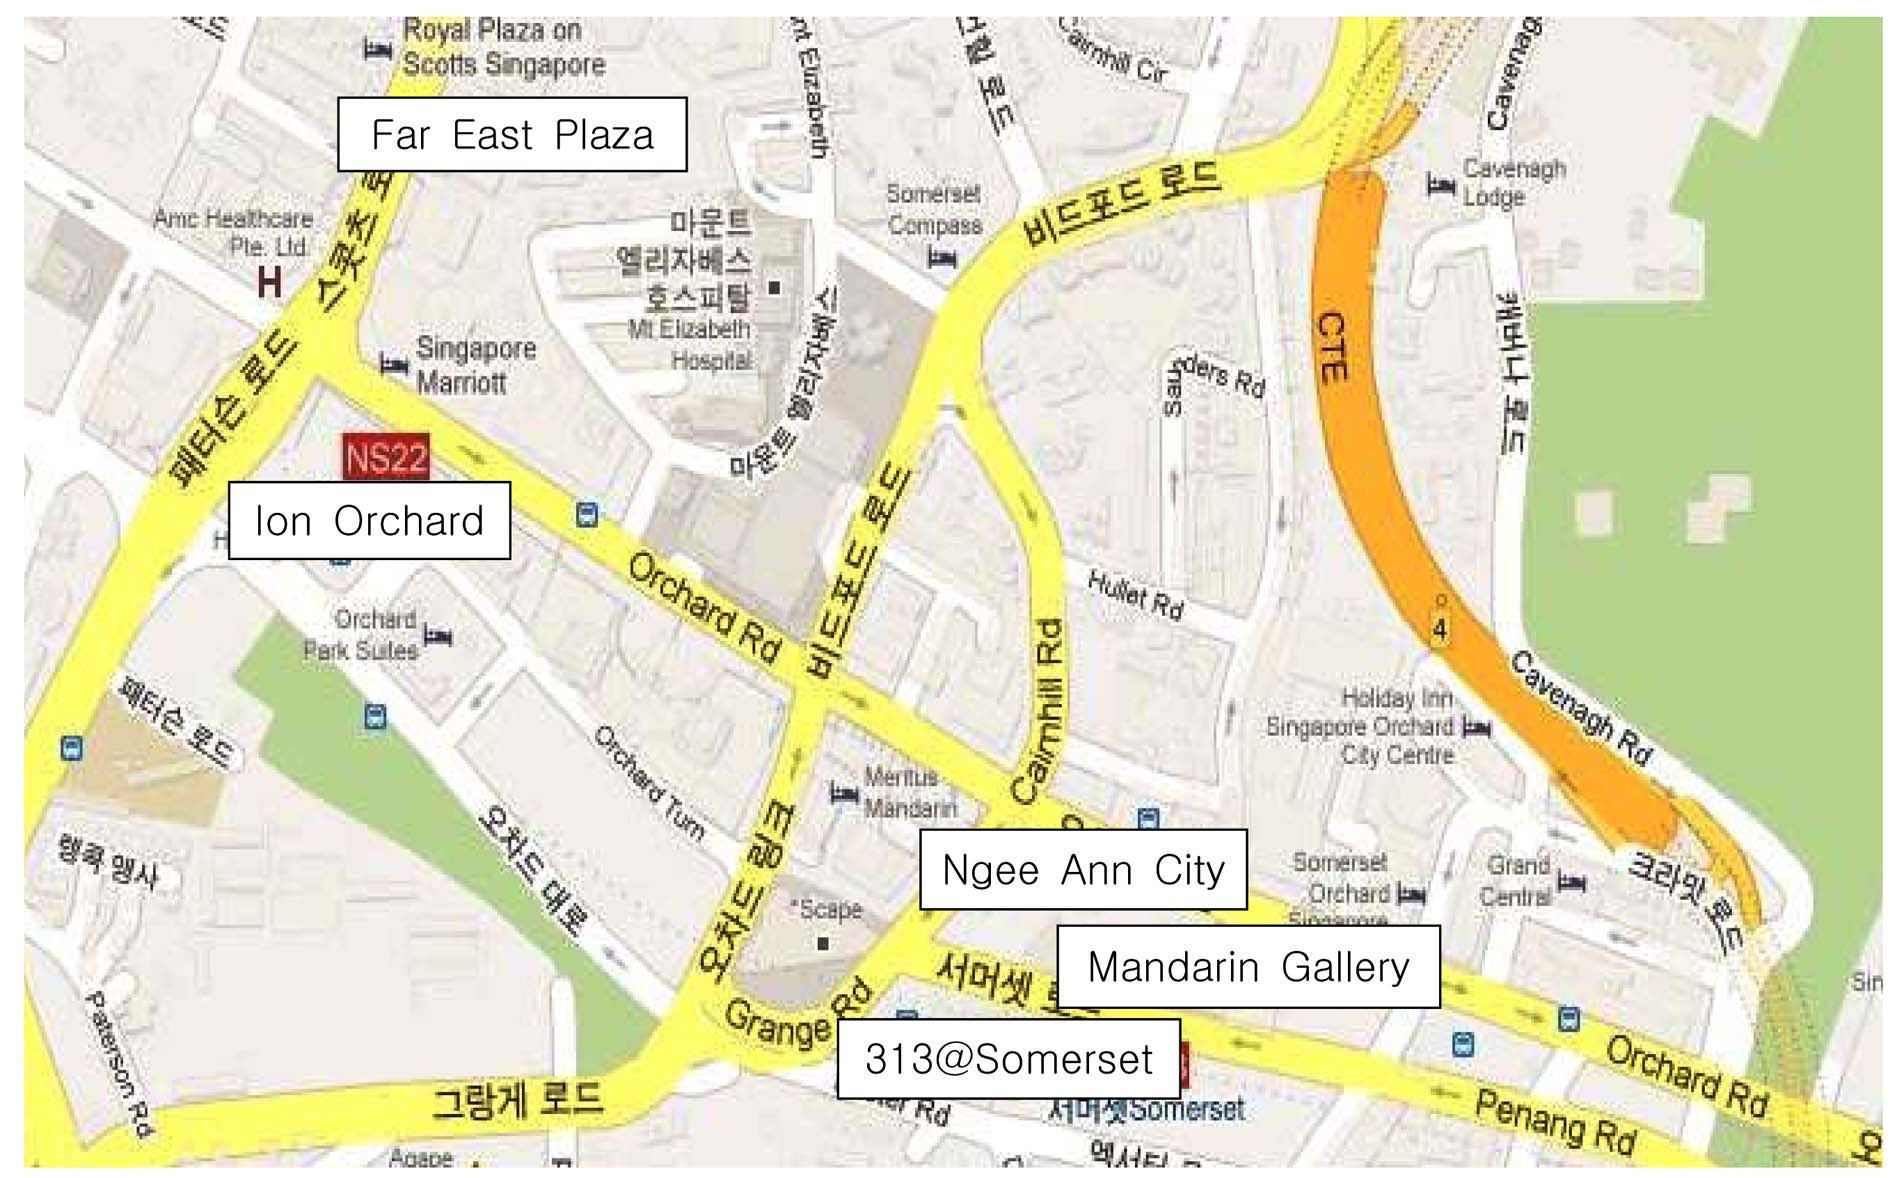 Map of Orchard Road.
http://maps.google.co.kr/